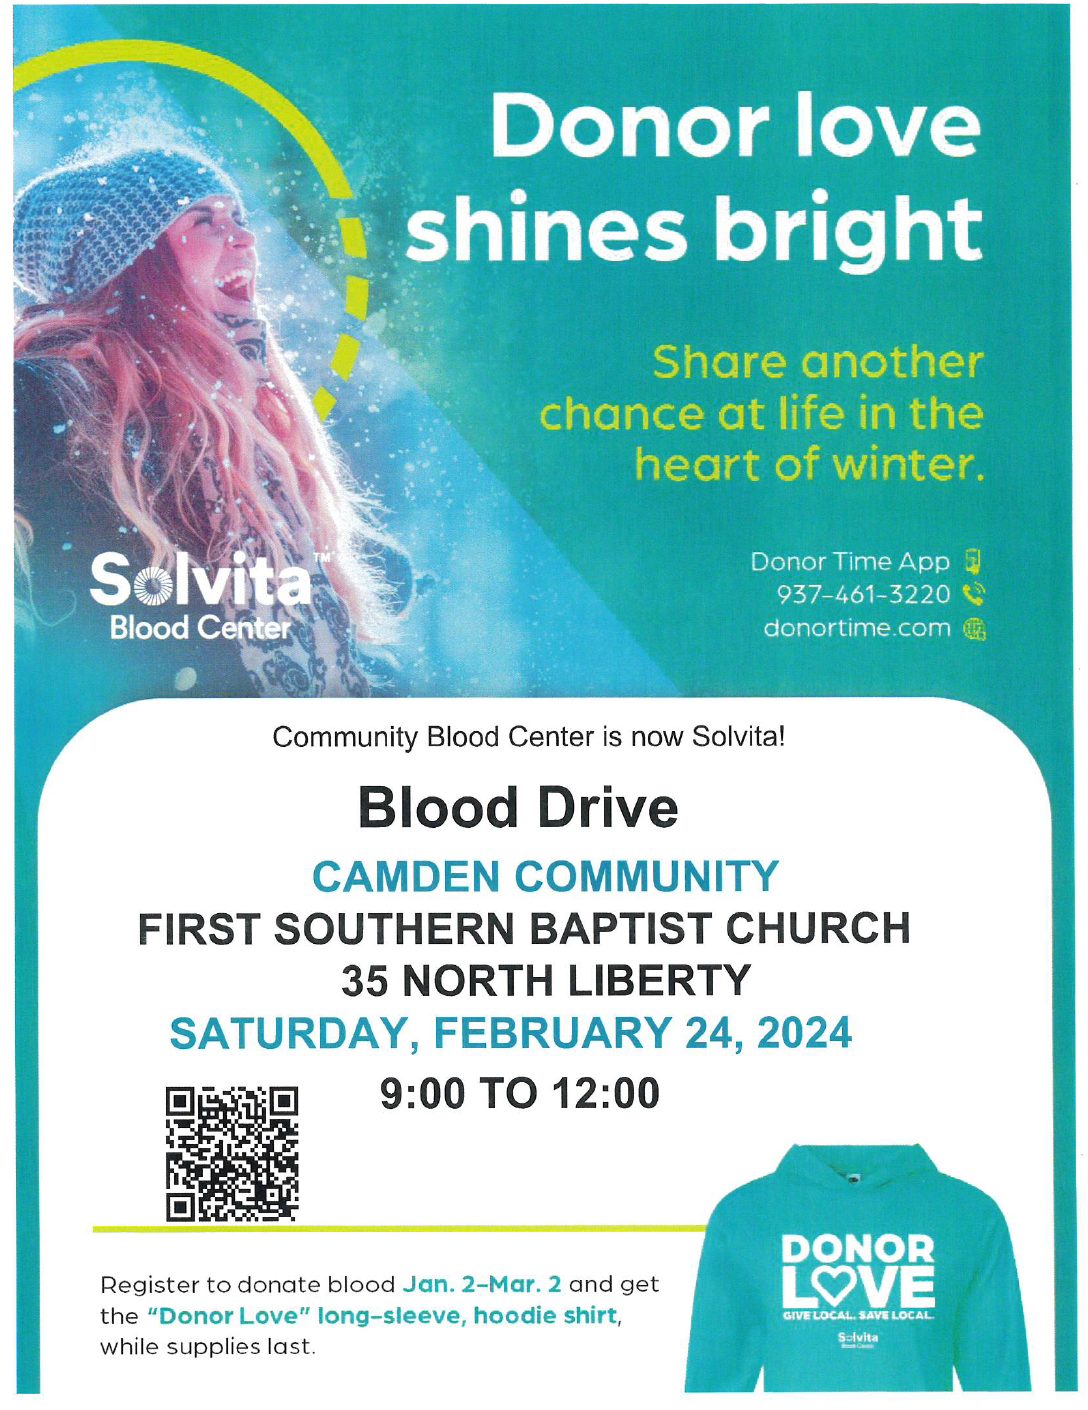 Blood Drive @ First Southern Baptist Church, Family Center